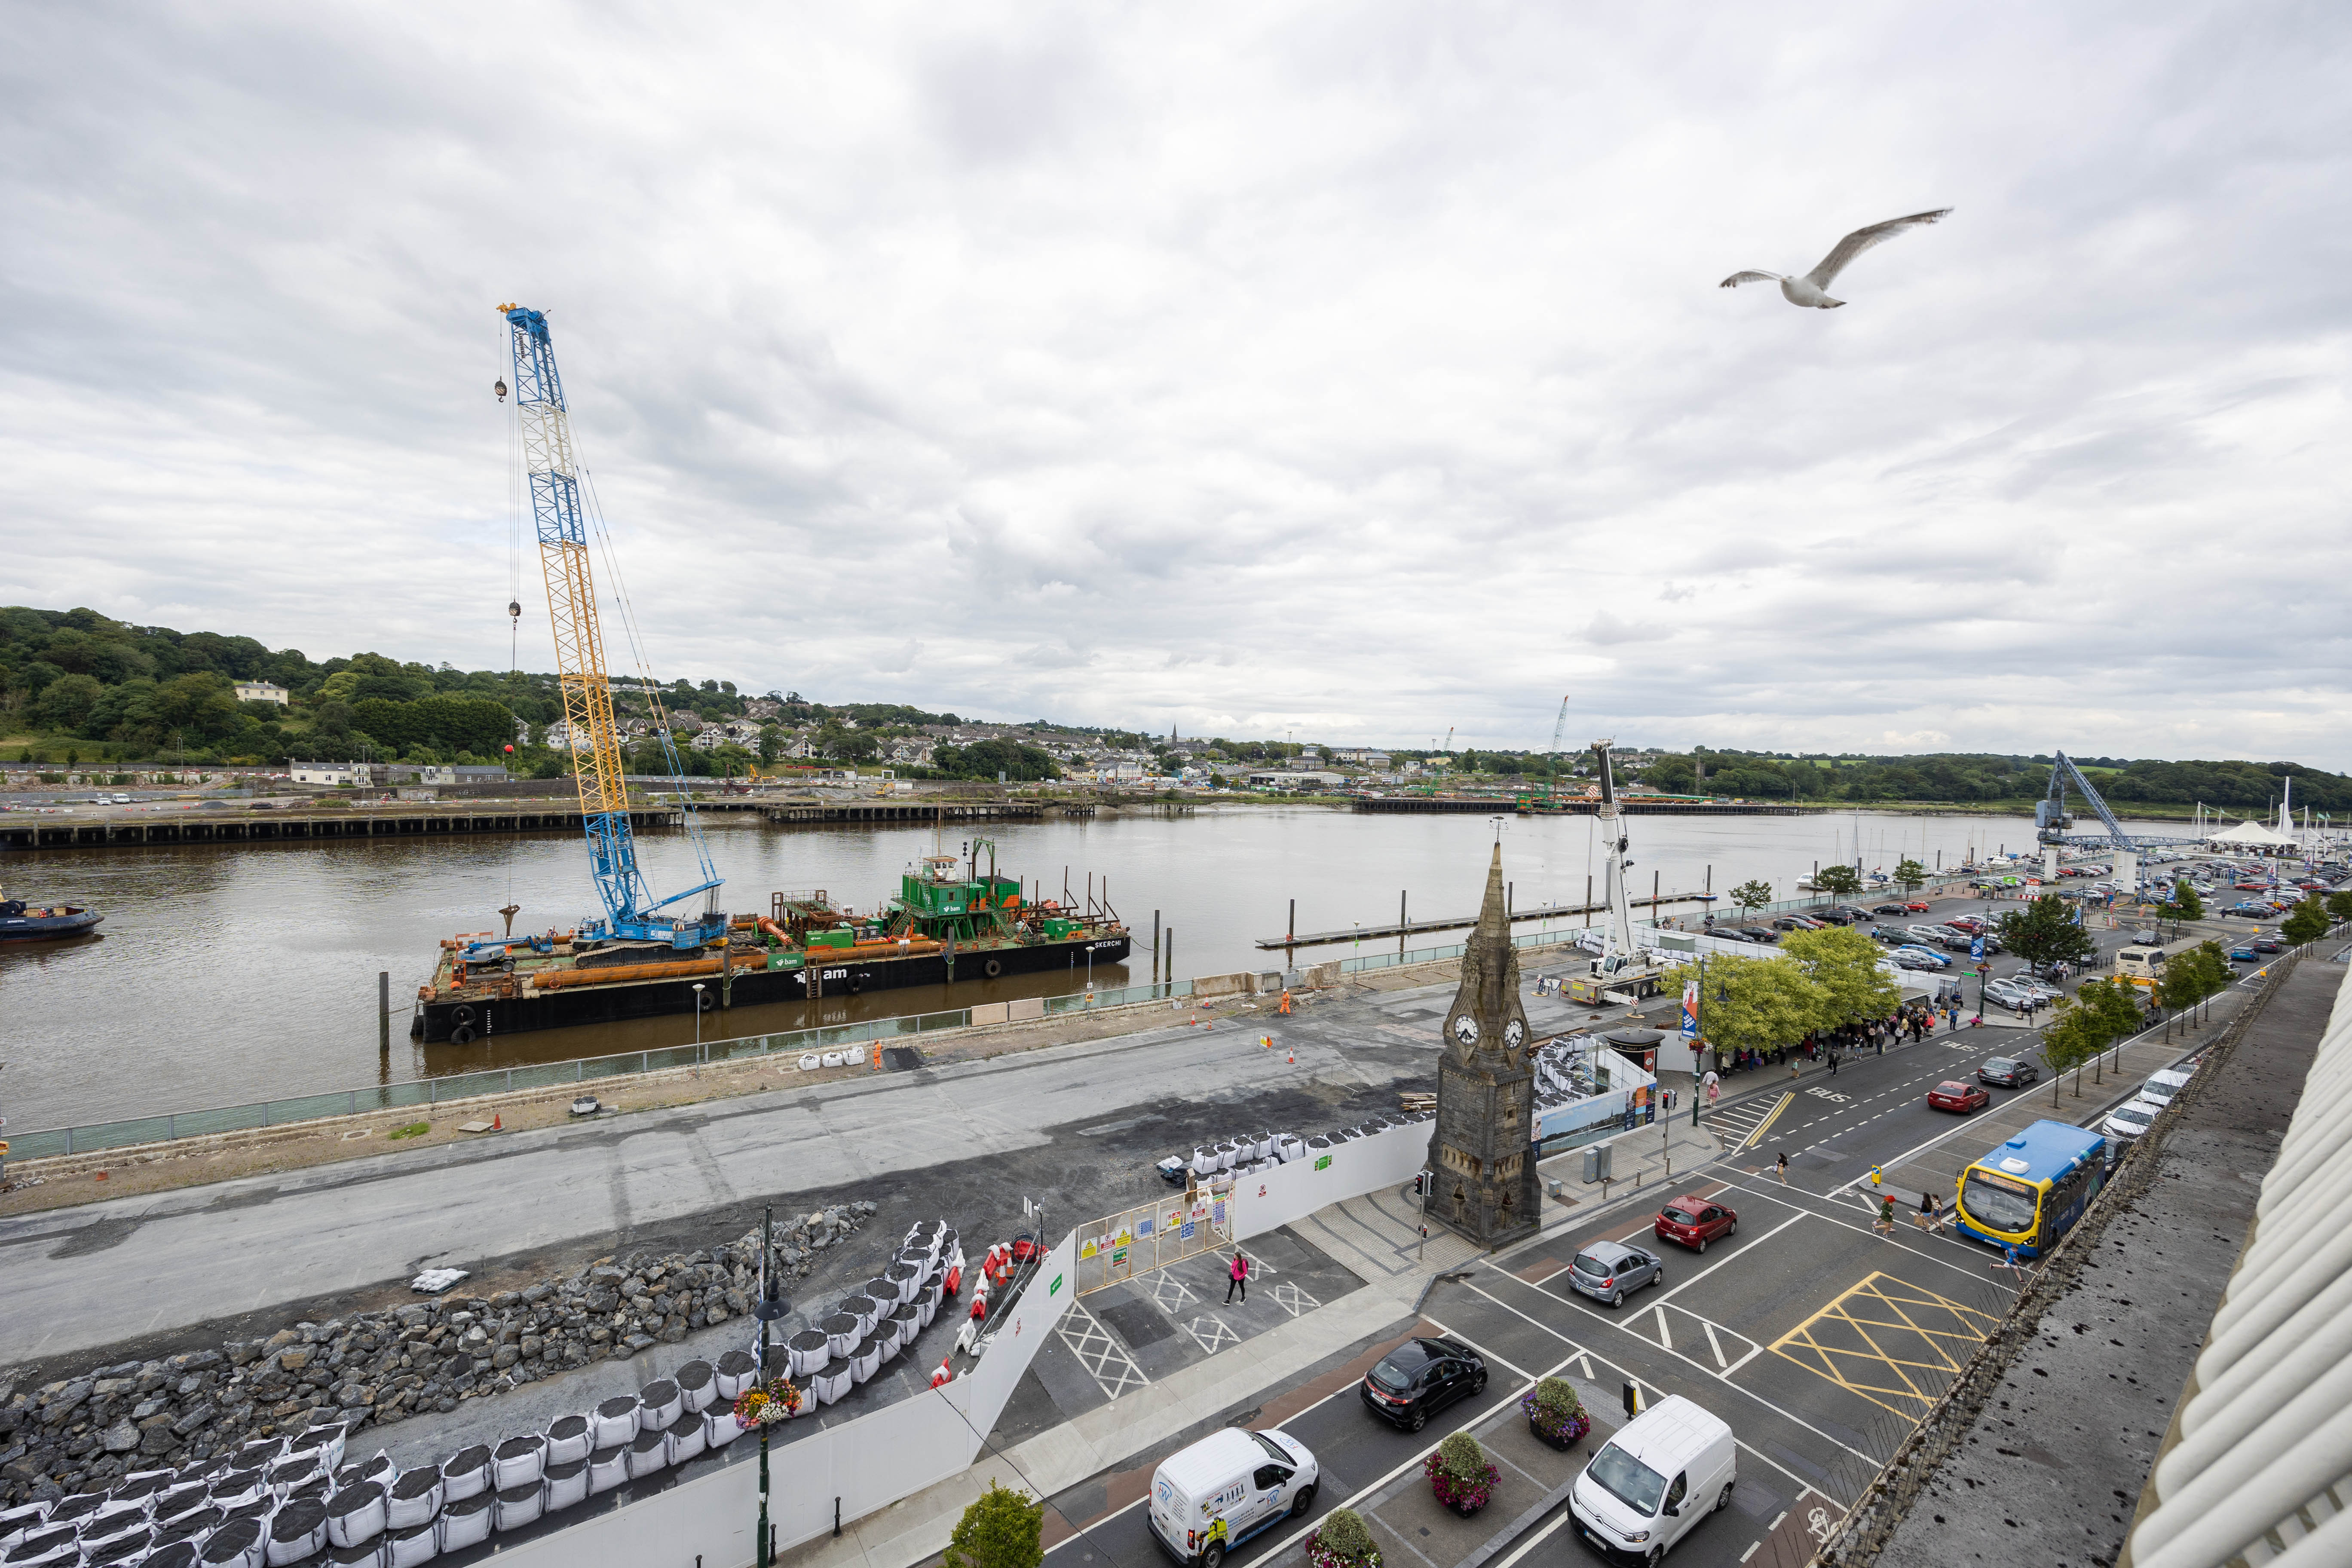 Waterford North Quays - Skerchi Barge for Sustainable Transport Bridge works